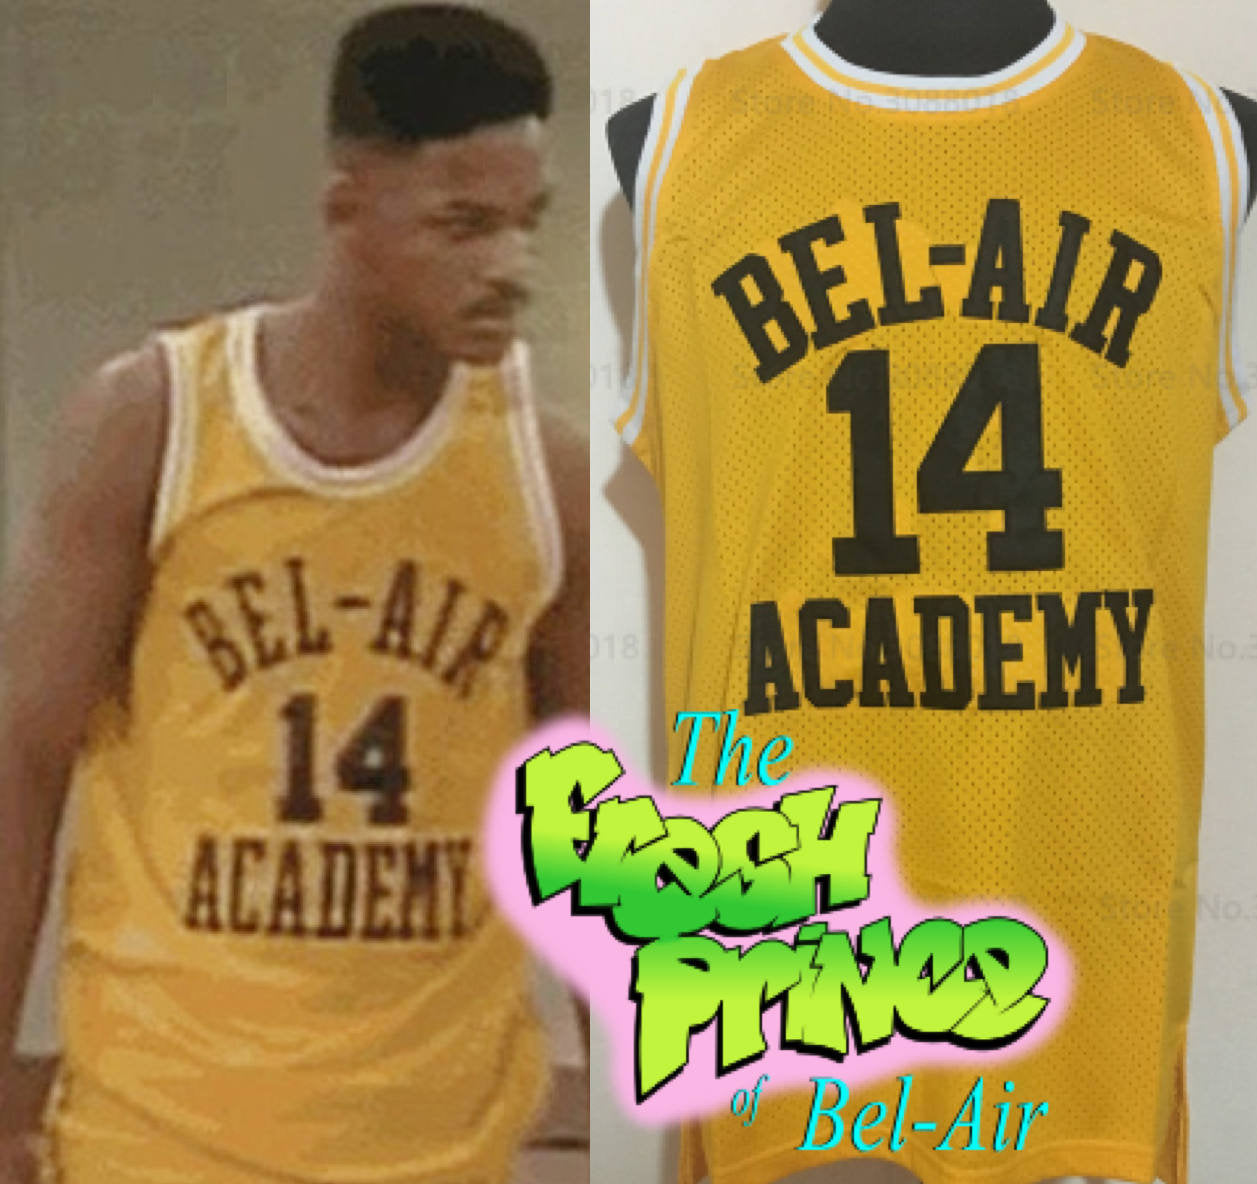 FLASH SALE! Will Smith Fresh Prince of Bel-Air TV #14 Basketball